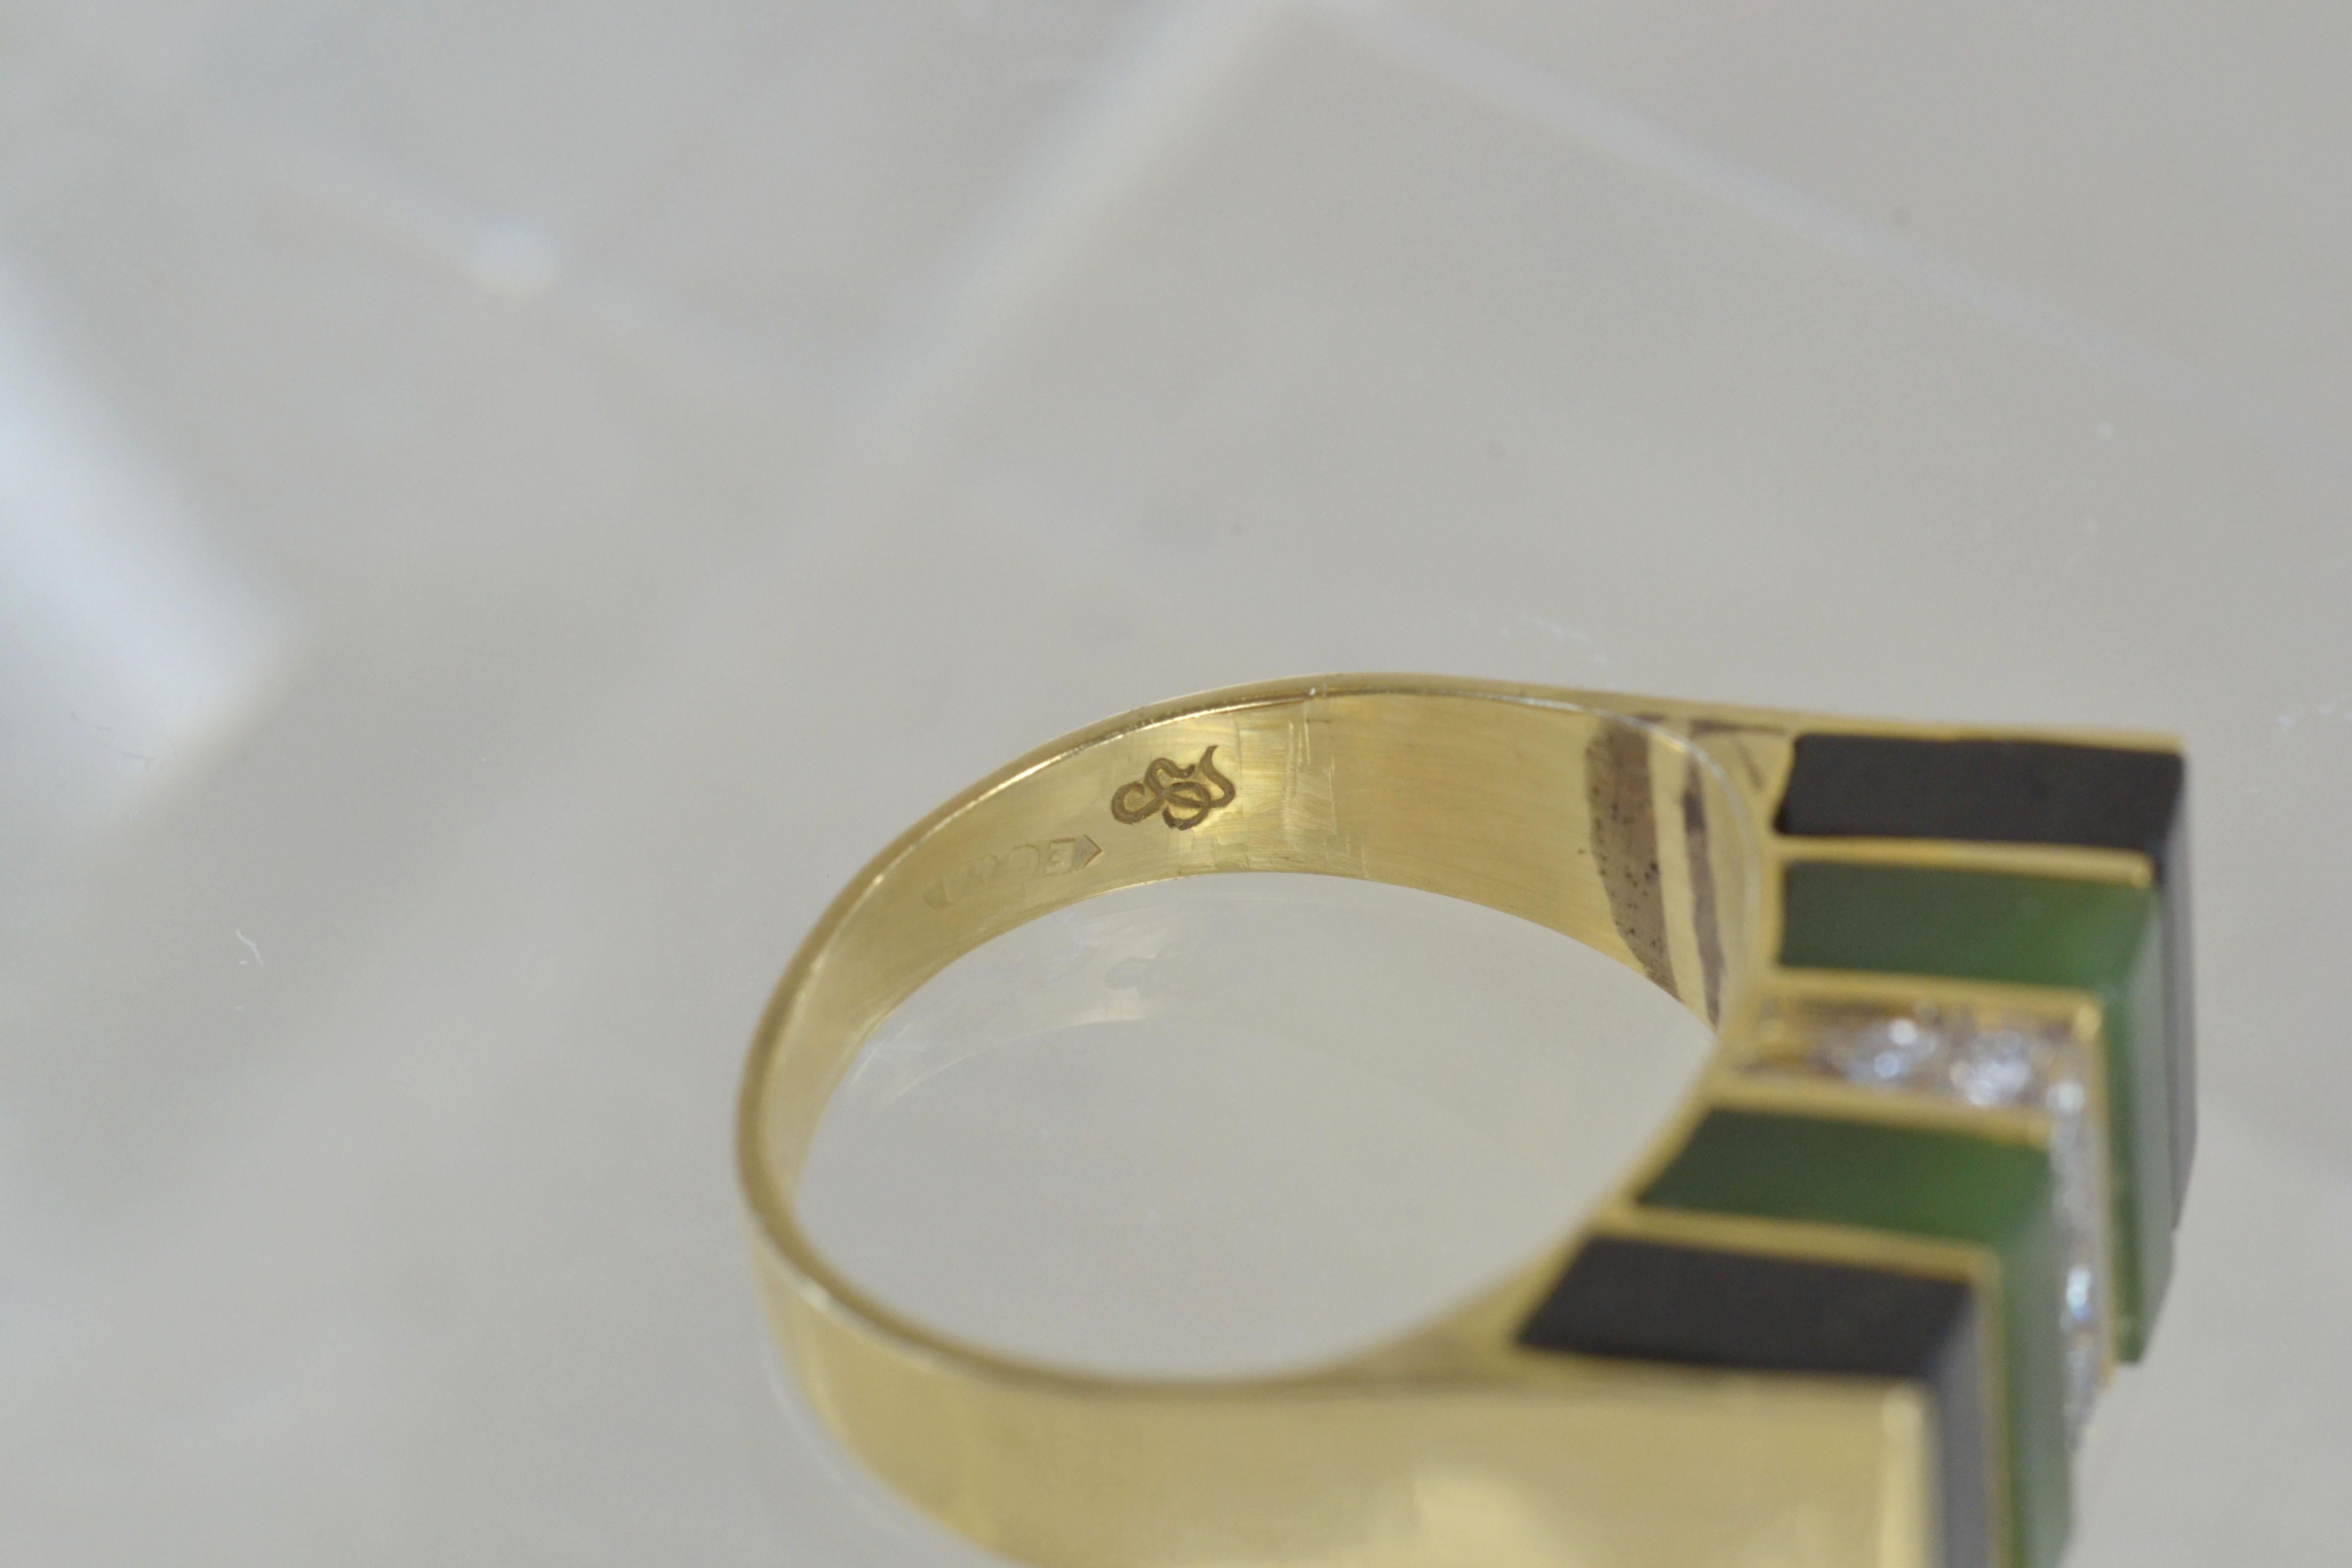 Vintage 14k Gold Malachite and Onyx Striped Ring with Diamonds, One-of-a-kind For Sale 1